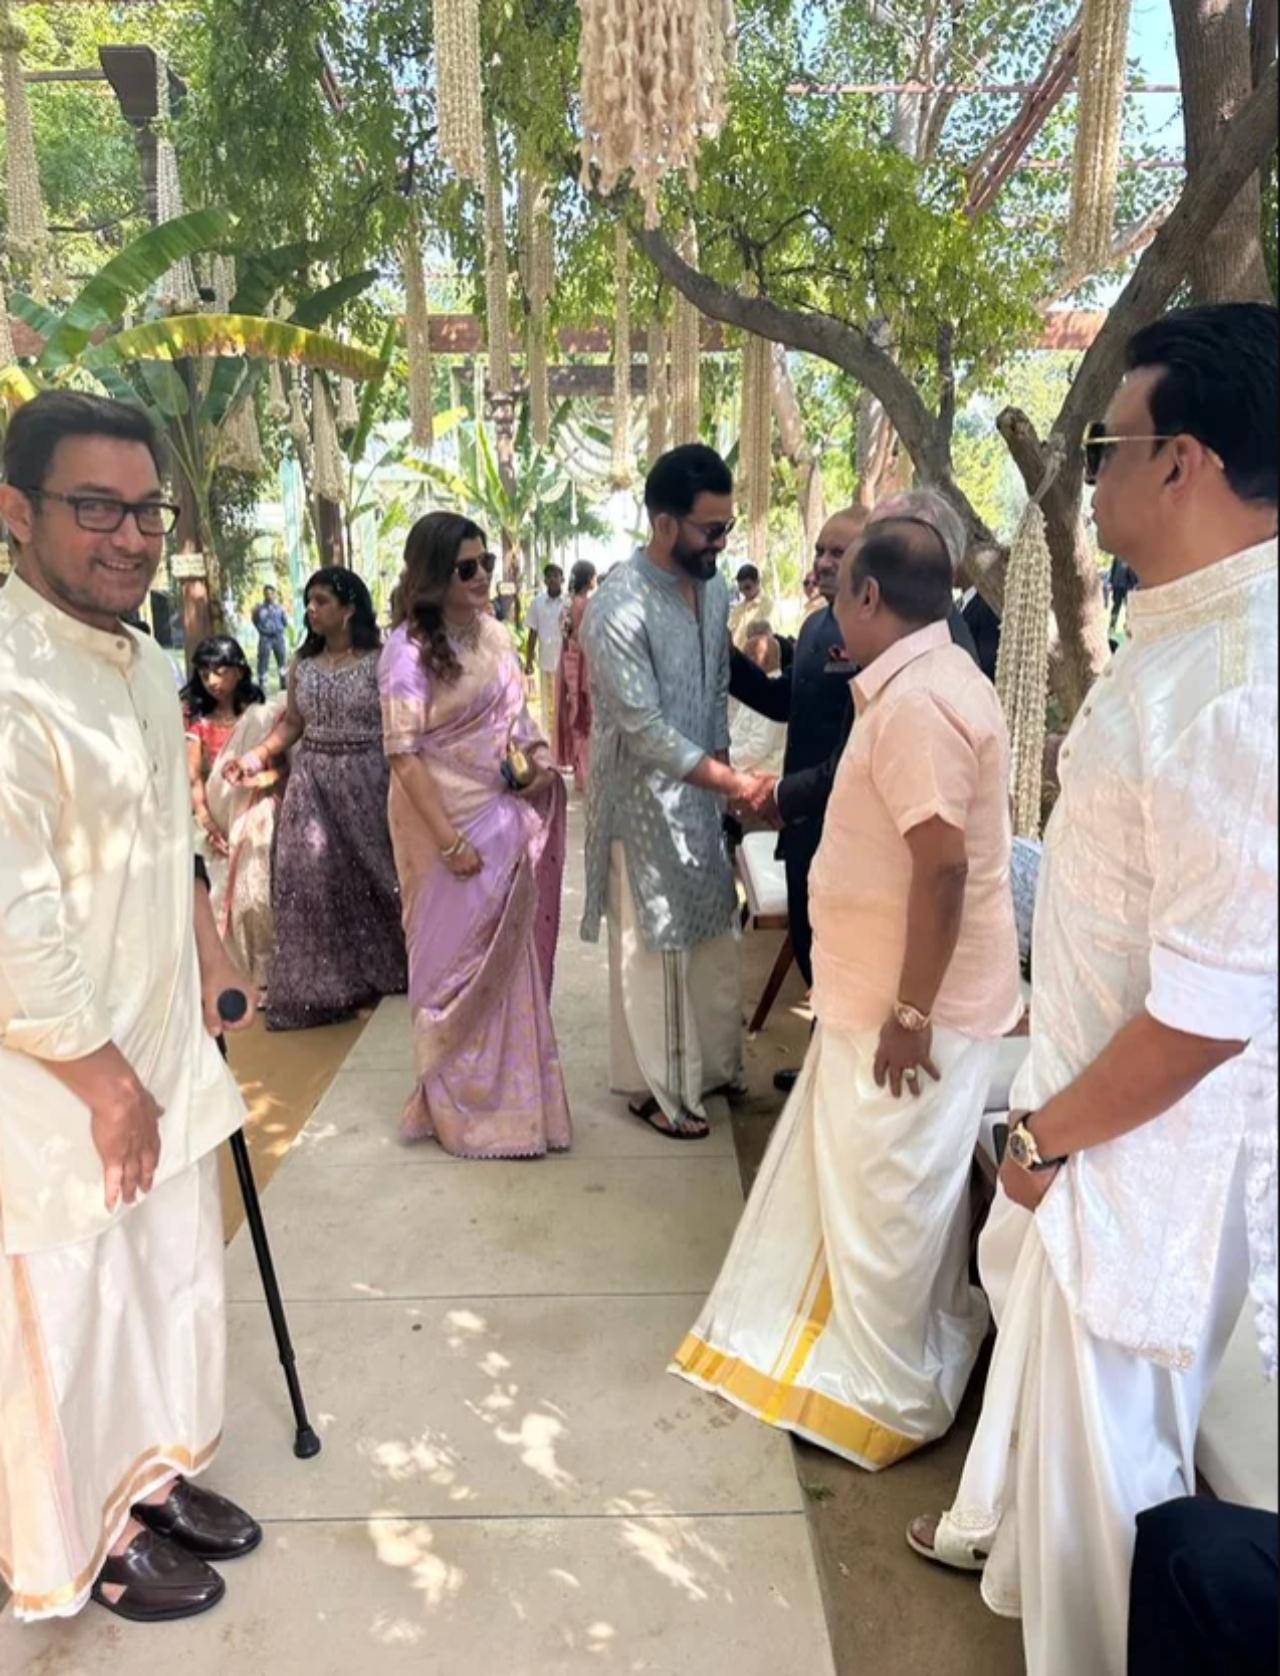 The past week was all about the big wedding of actors Sidharth Malhotra and Kiara Advani. Meanwhile, around the same time some of the biggest stars of the Indian film industry attended Star India head K Madhavan's son's wedding in Jaipur